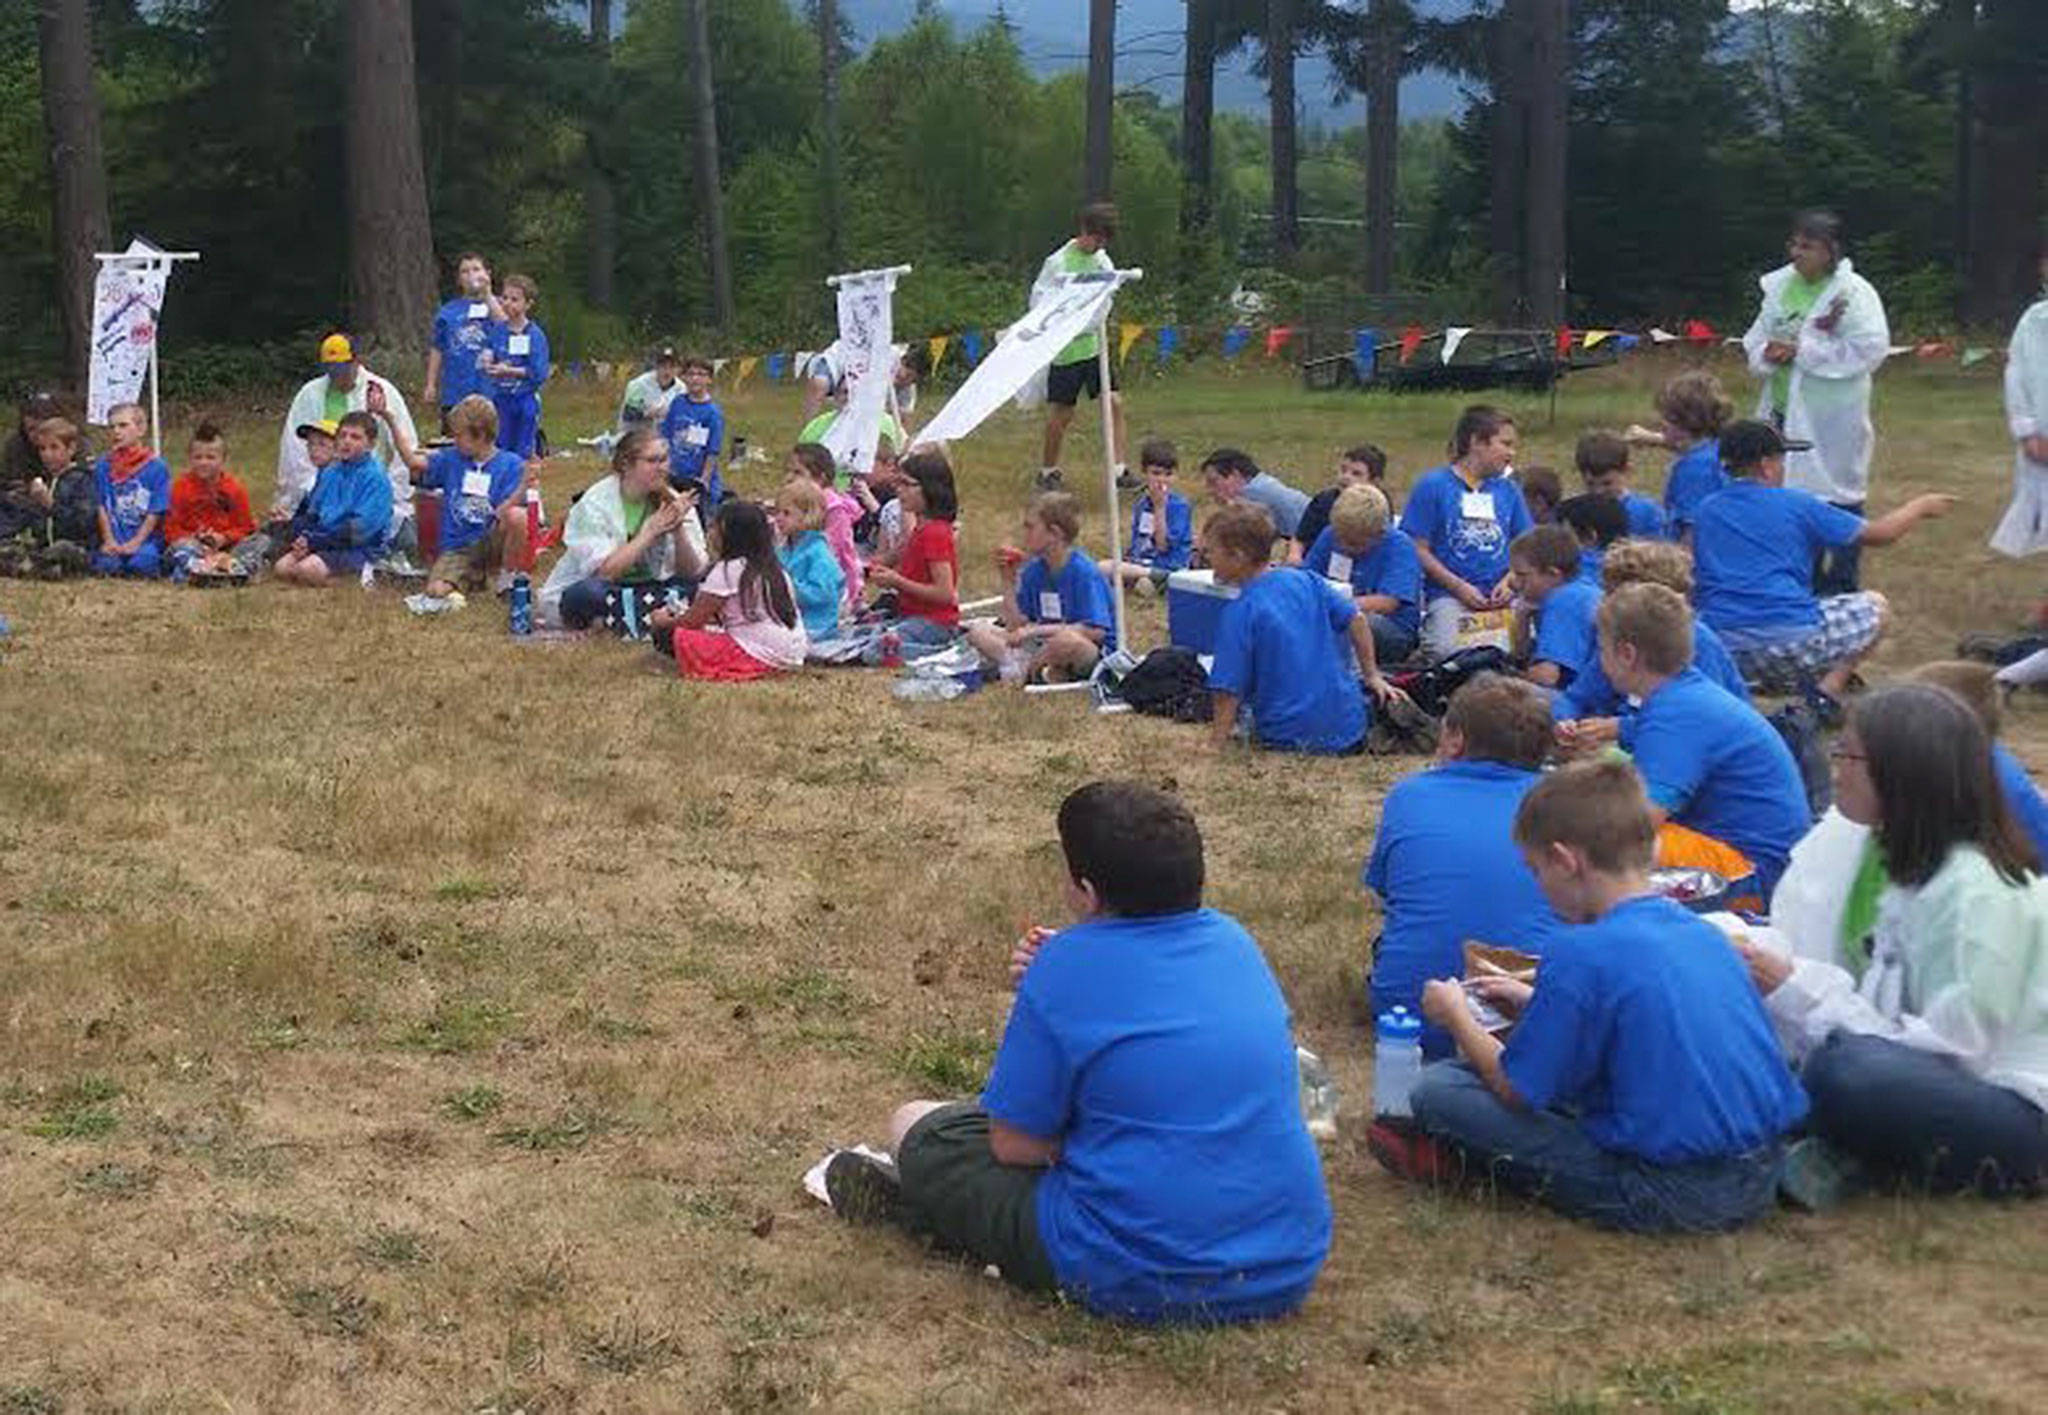 Boys and girls can already attend the Boy Scouts of America Day Camps such as this one offered in the Mt. Olympus district in 2016. BSA board of directors announced on Oct. 11 they approved to allow girls to join Cub Scout programs and deliver a Scouting program for older girls that would enable them to earn the rank of Eagle Scout.